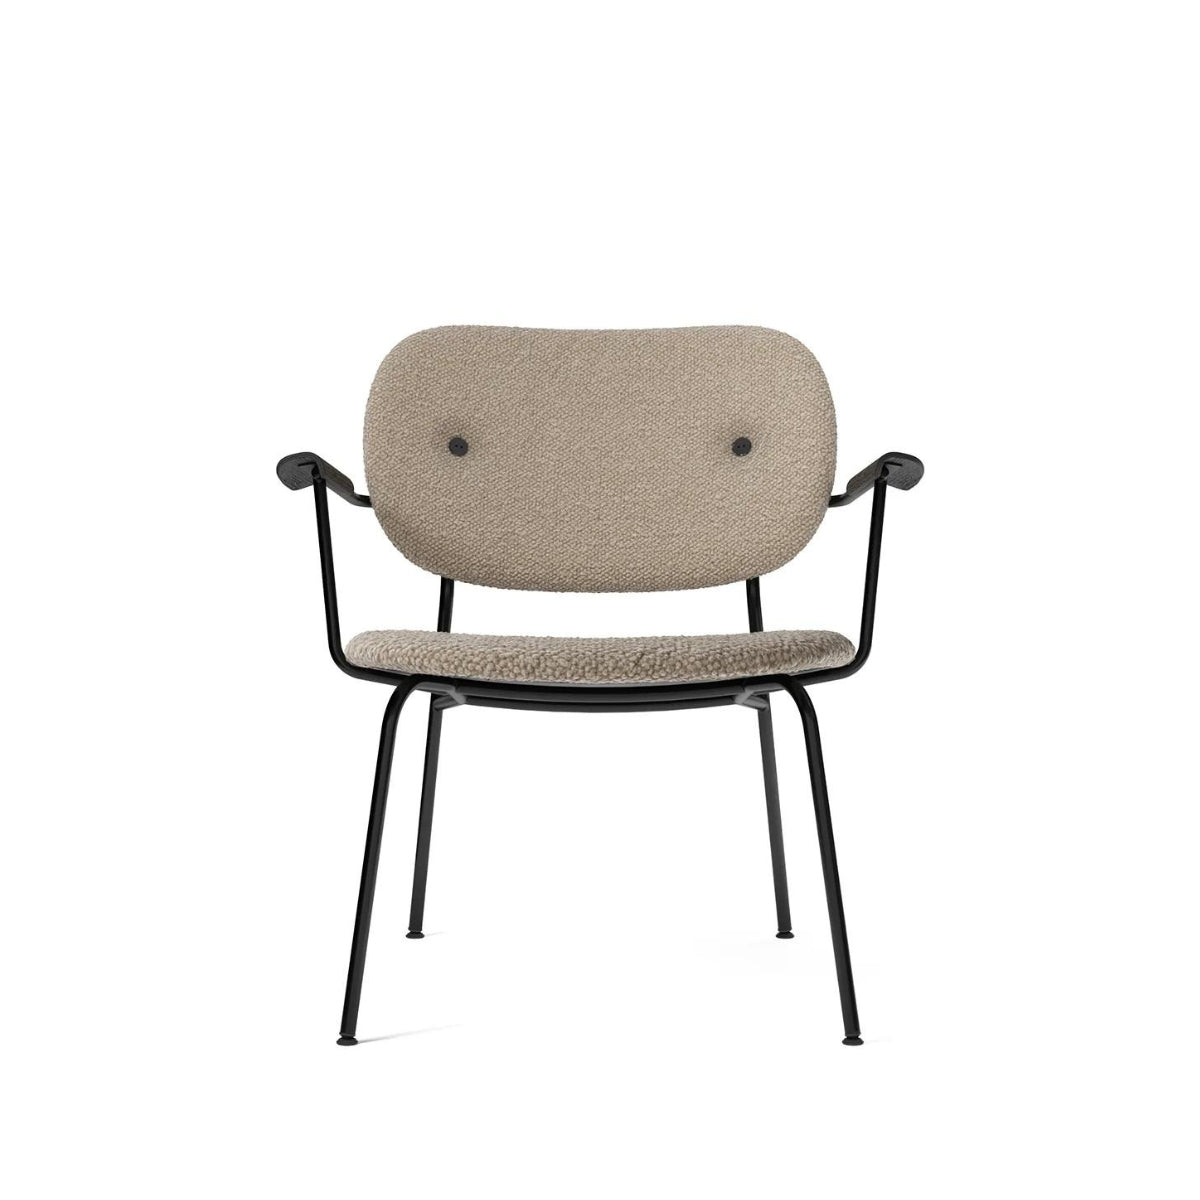 Audo Copenhagen | Co Lounge Chair – Upholstered Seat and Back